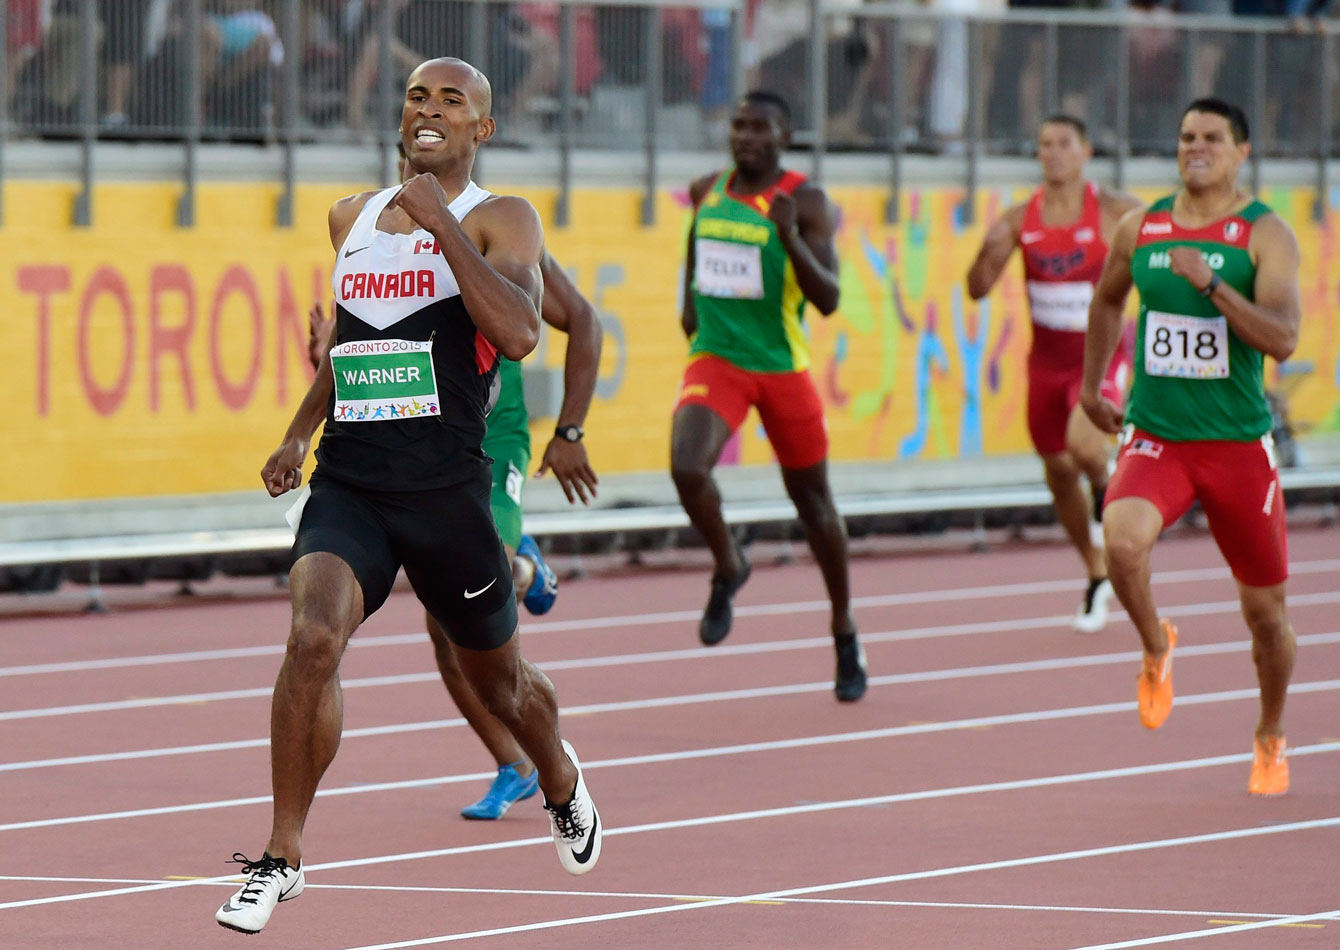 Damian Warner outruns the Pan Am Games field in 47.66 seconds in the 400m event of the decathlon on July 22, 2015. 